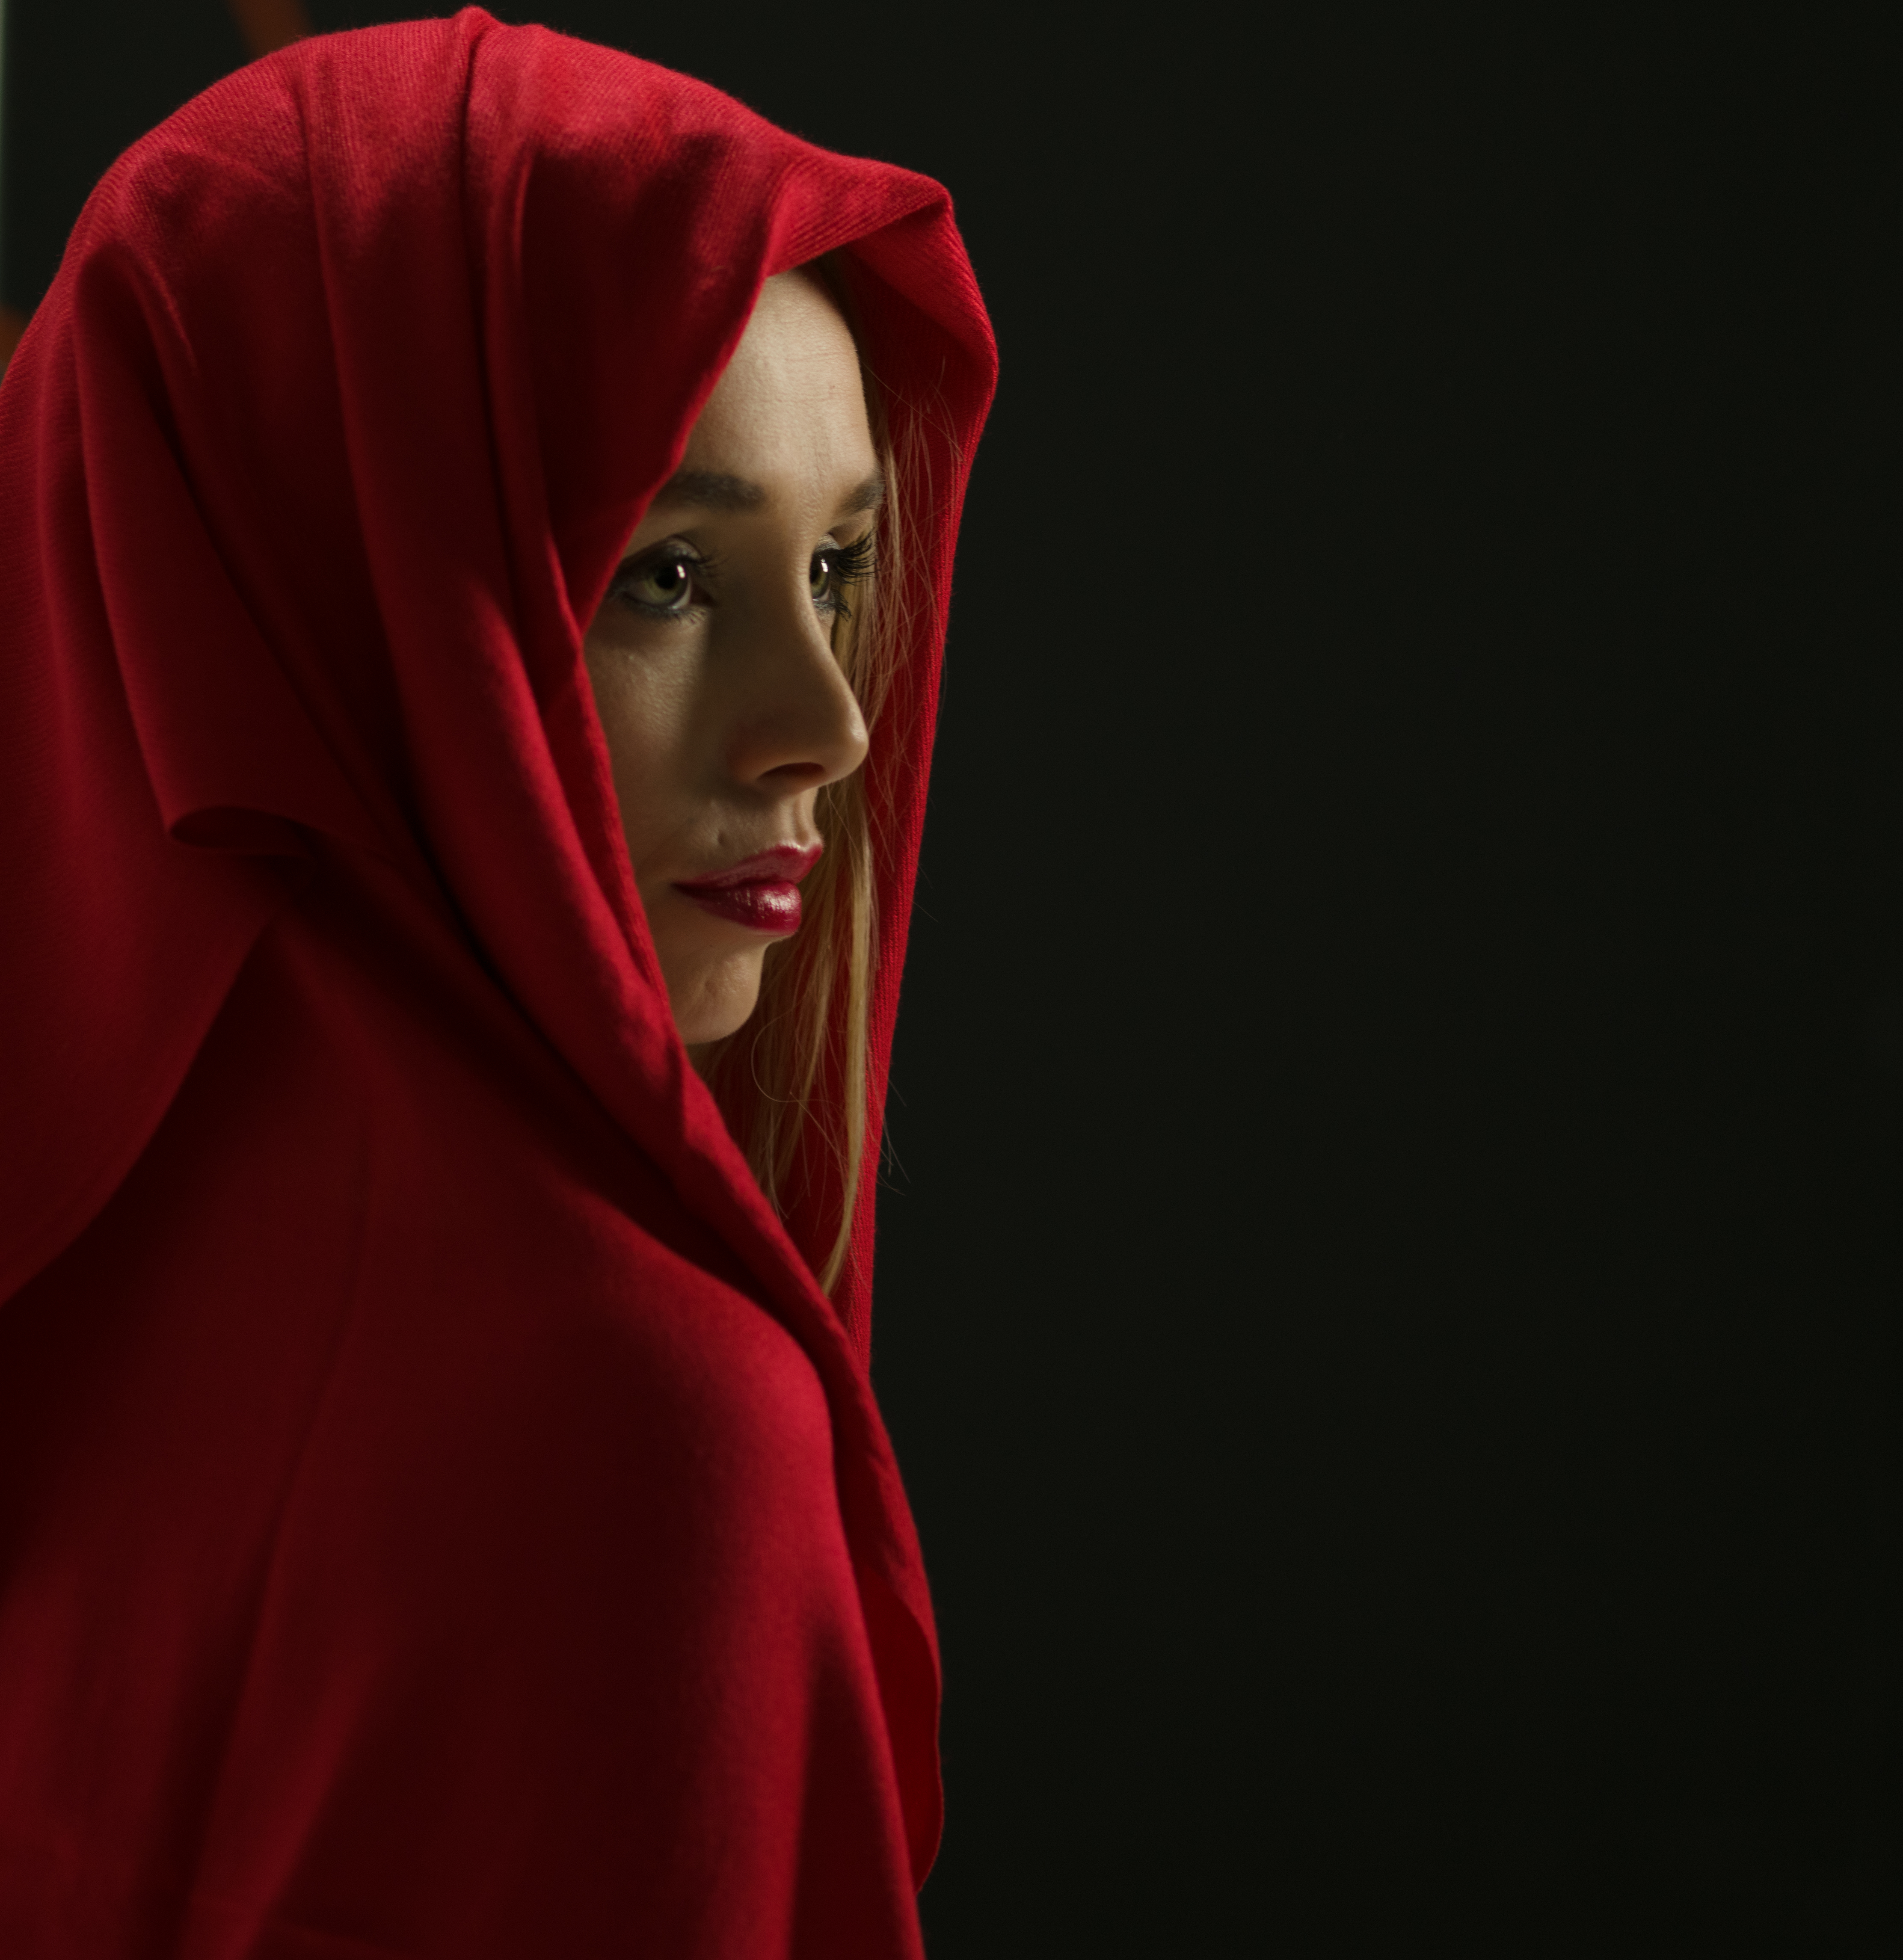 Model wearing red scarf (23232261500)